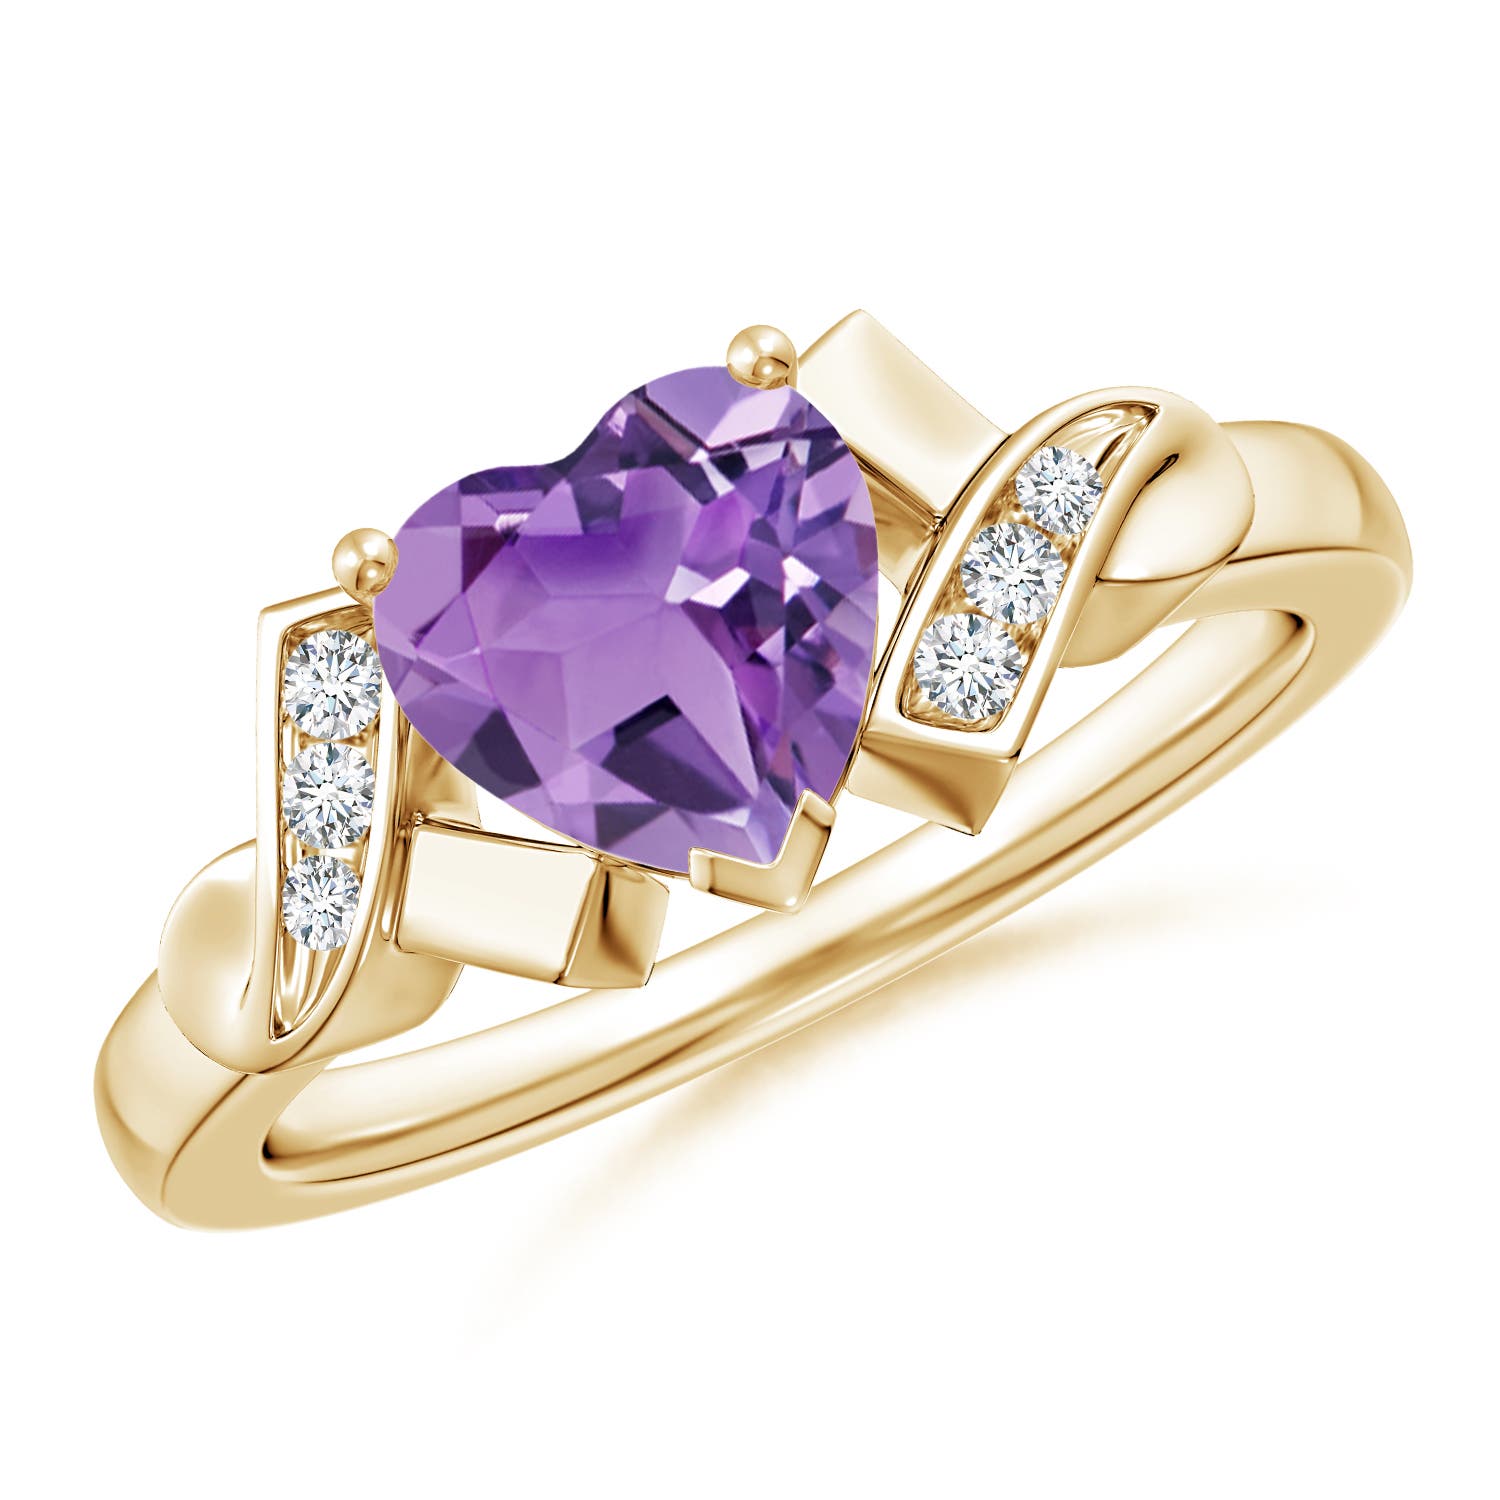 A - Amethyst / 1.17 CT / 14 KT Yellow Gold